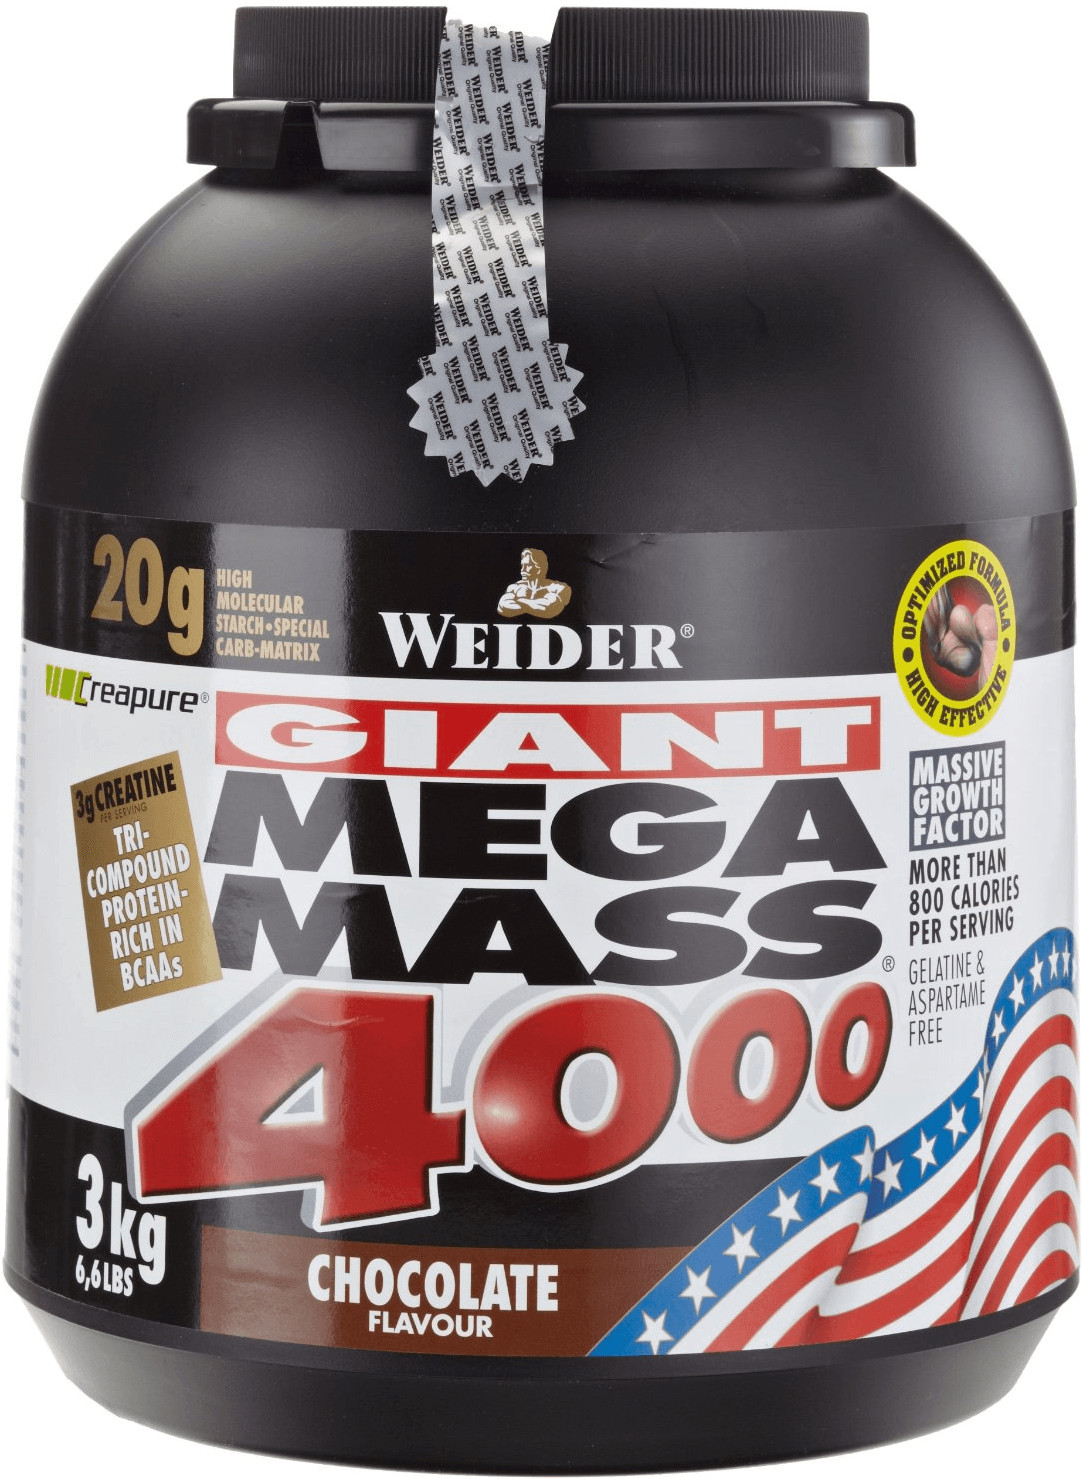 Buy Weider Mega Mass 4000 3000g from £36.58 (Today) – Best Deals on